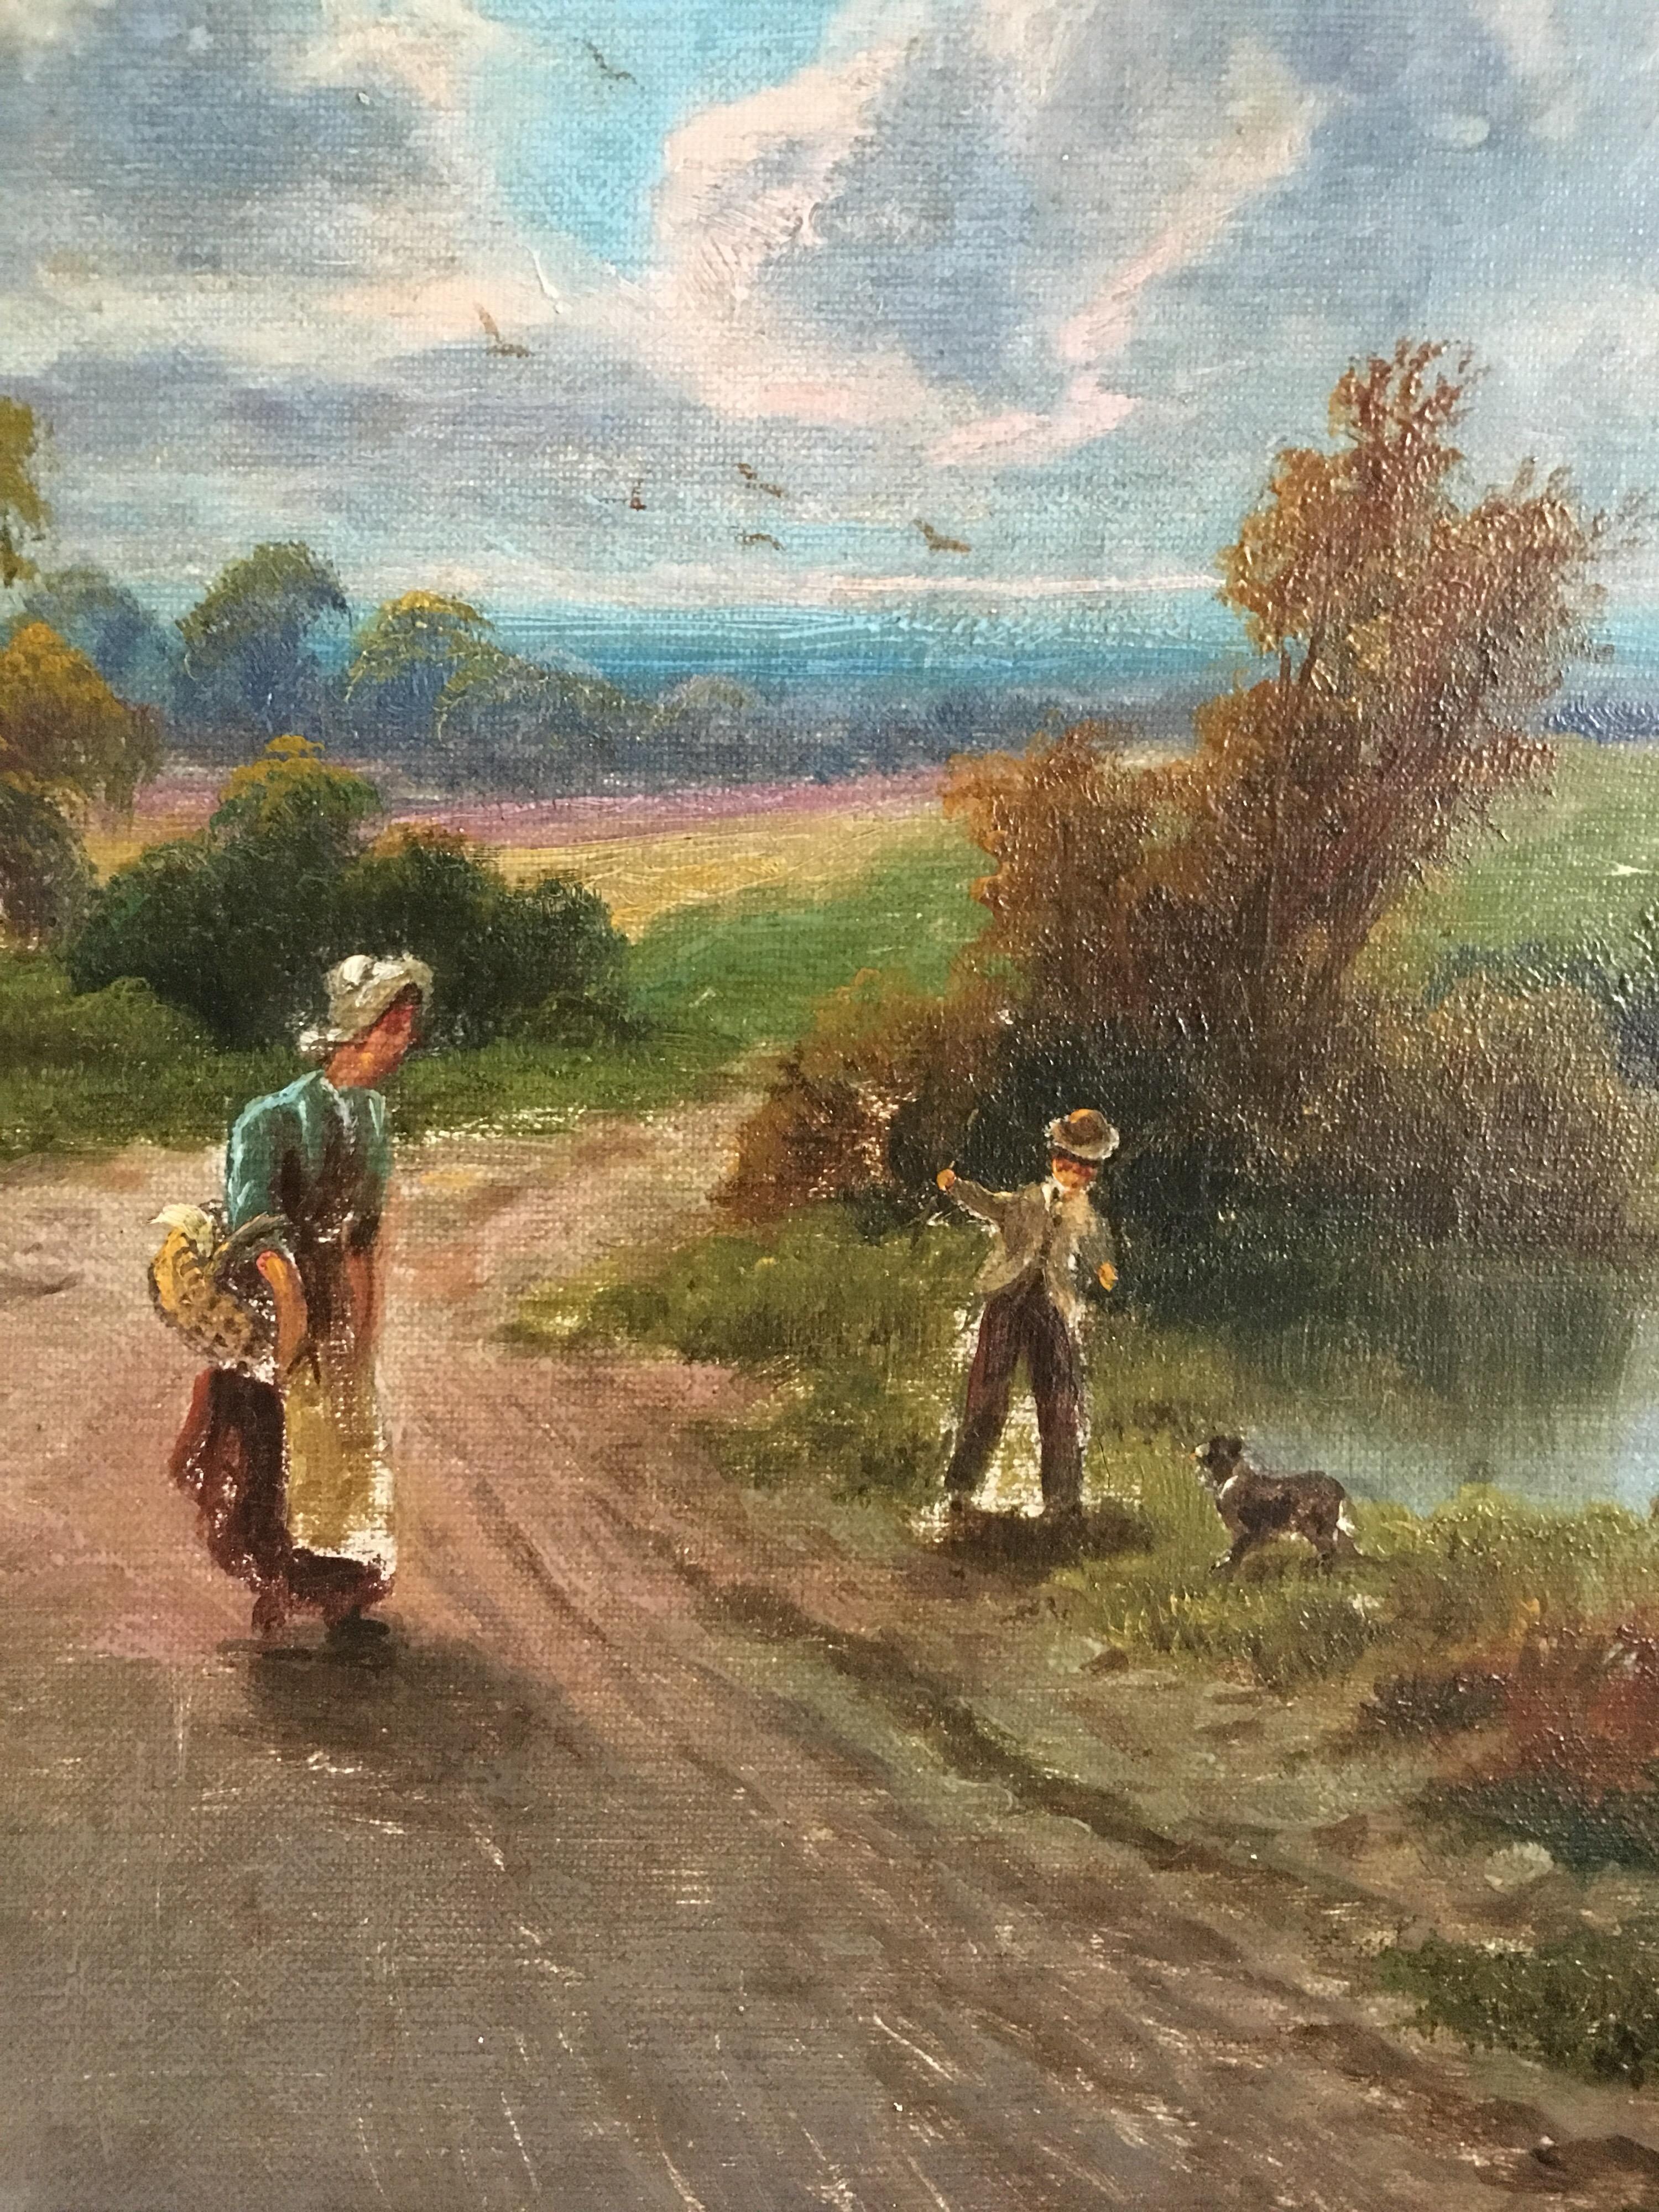 The Rural Road, Countryside Landscape Antique Oil Painting - Brown Figurative Painting by Unknown